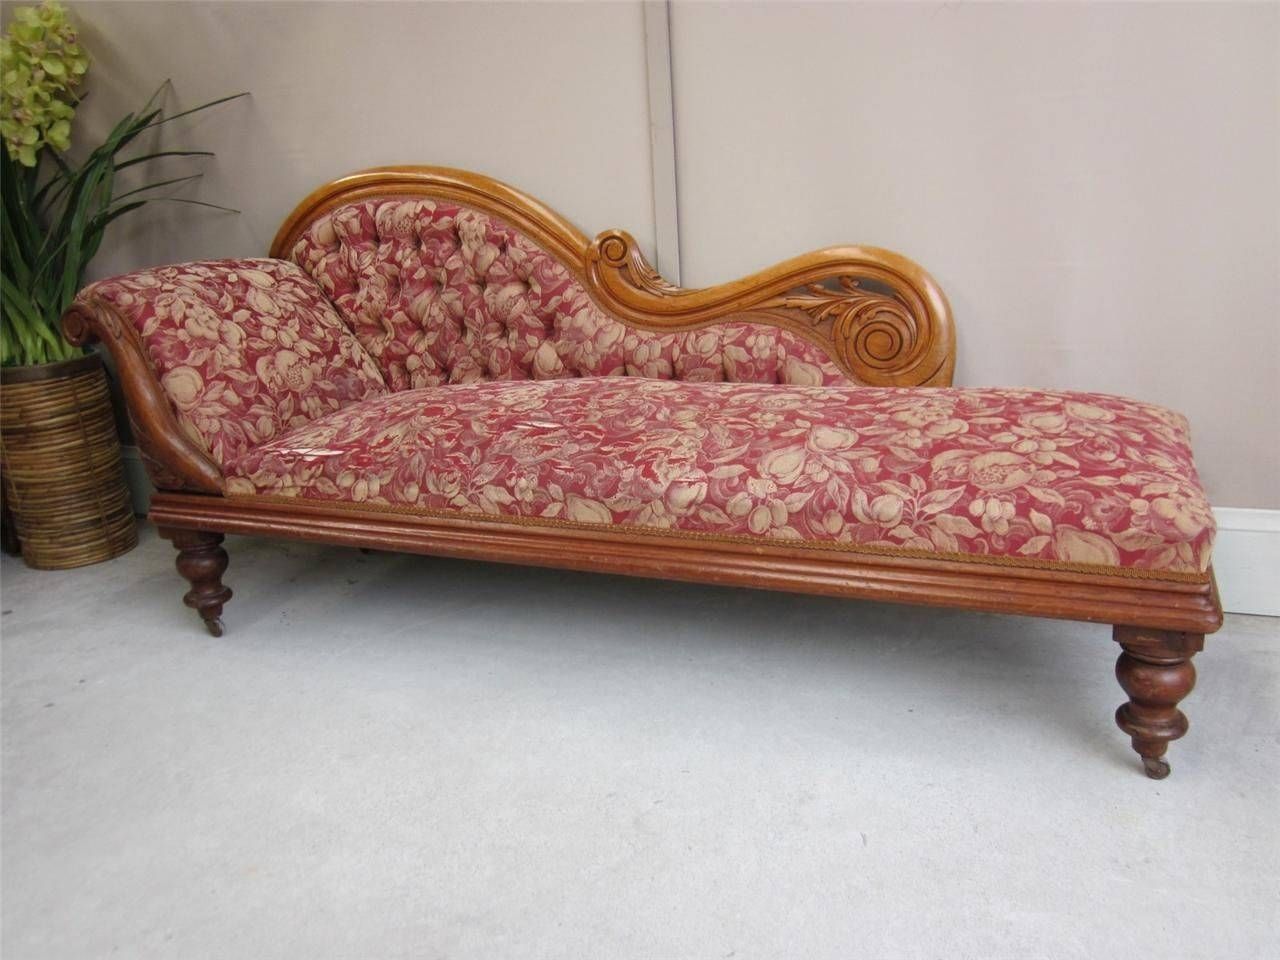 Antique Leather Sofa Bed | Tehranmix Decoration In Old Fashioned Sofas (View 7 of 30)